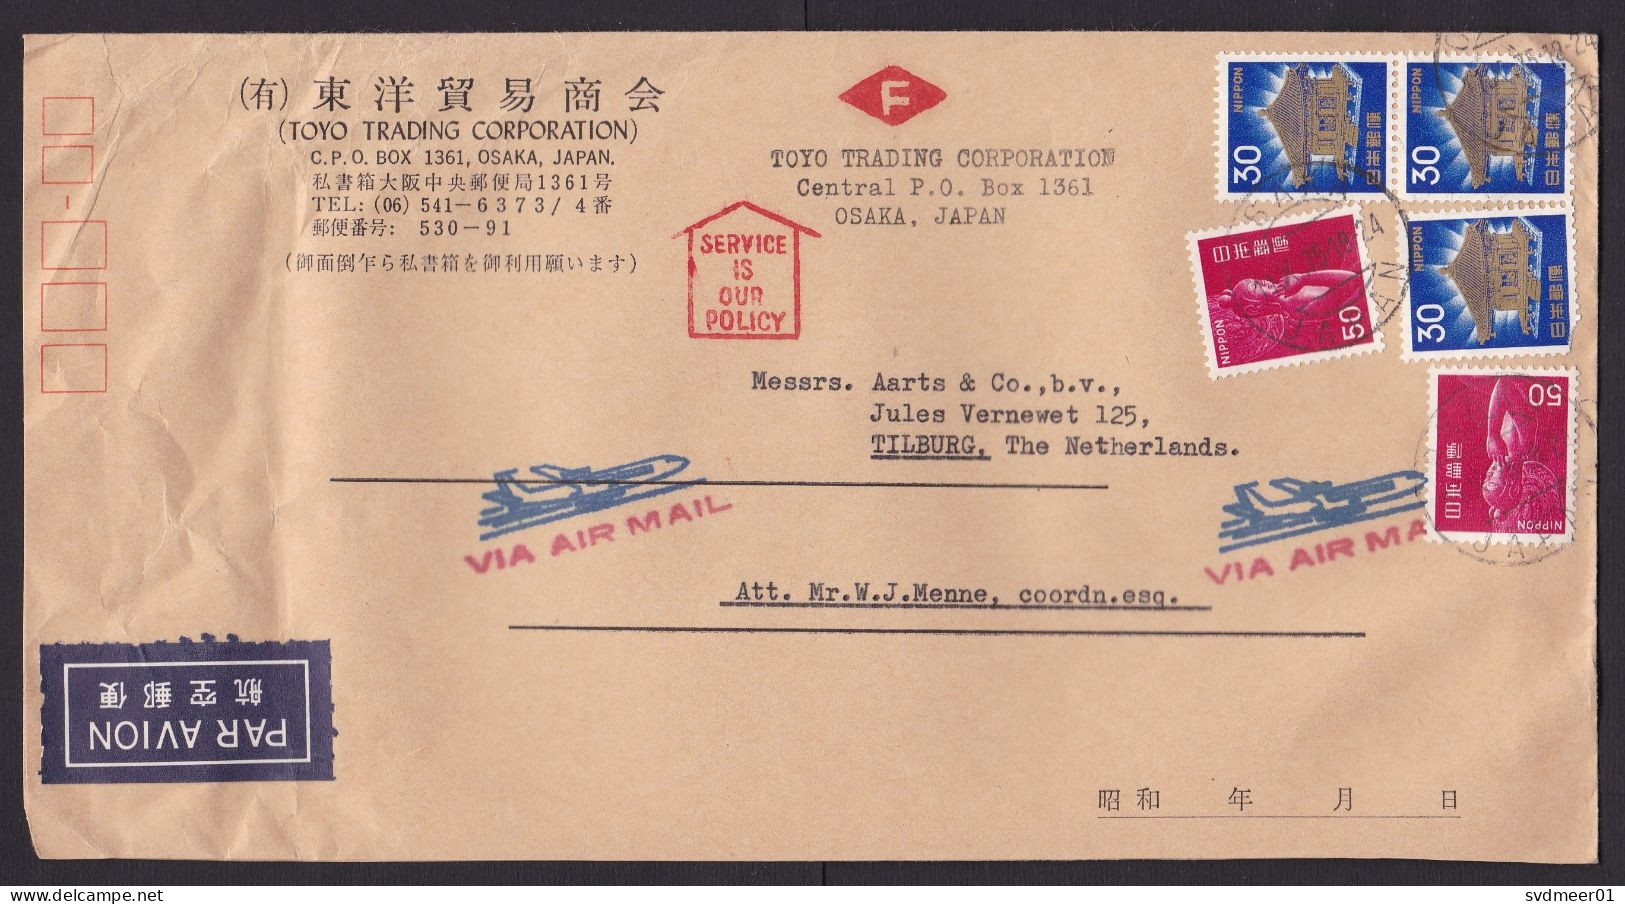 Japan: Airmail Cover To Netherlands, 1975, 5 Stamps, Temple, Statue, Heritage (minor Damage) - Lettres & Documents